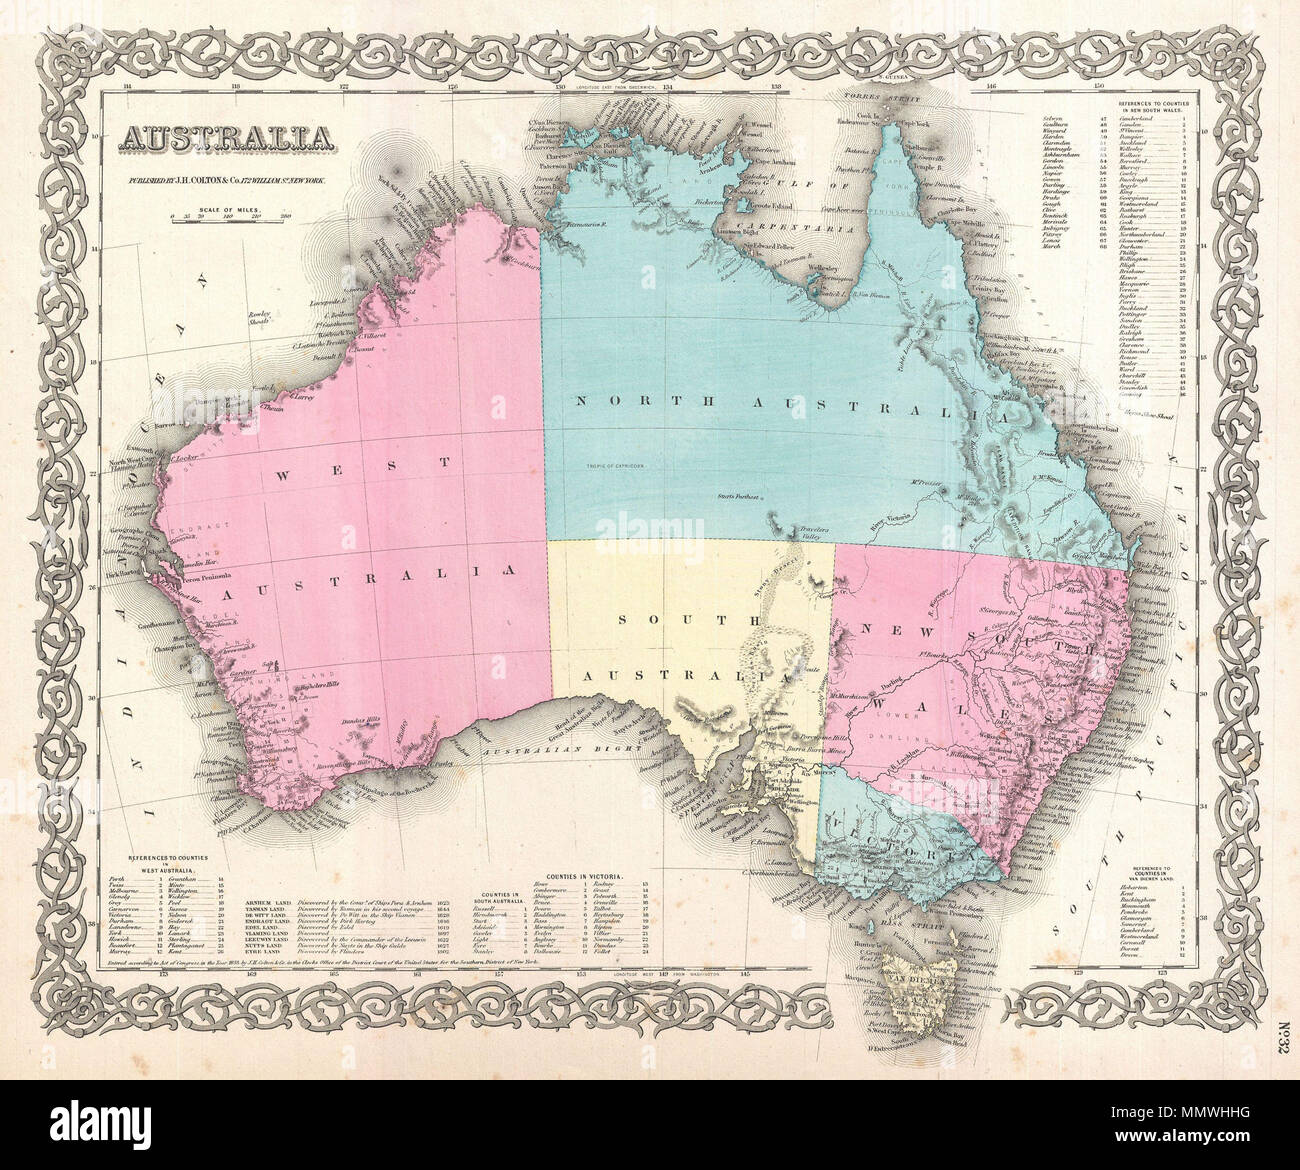 English: A beautiful 1855 first edition example of Colton's map of Australia.  Covers the entire continent including Tasmania or Van Diemen's Land.  Colton's mappings of Australia, updated annually through the 1860s,